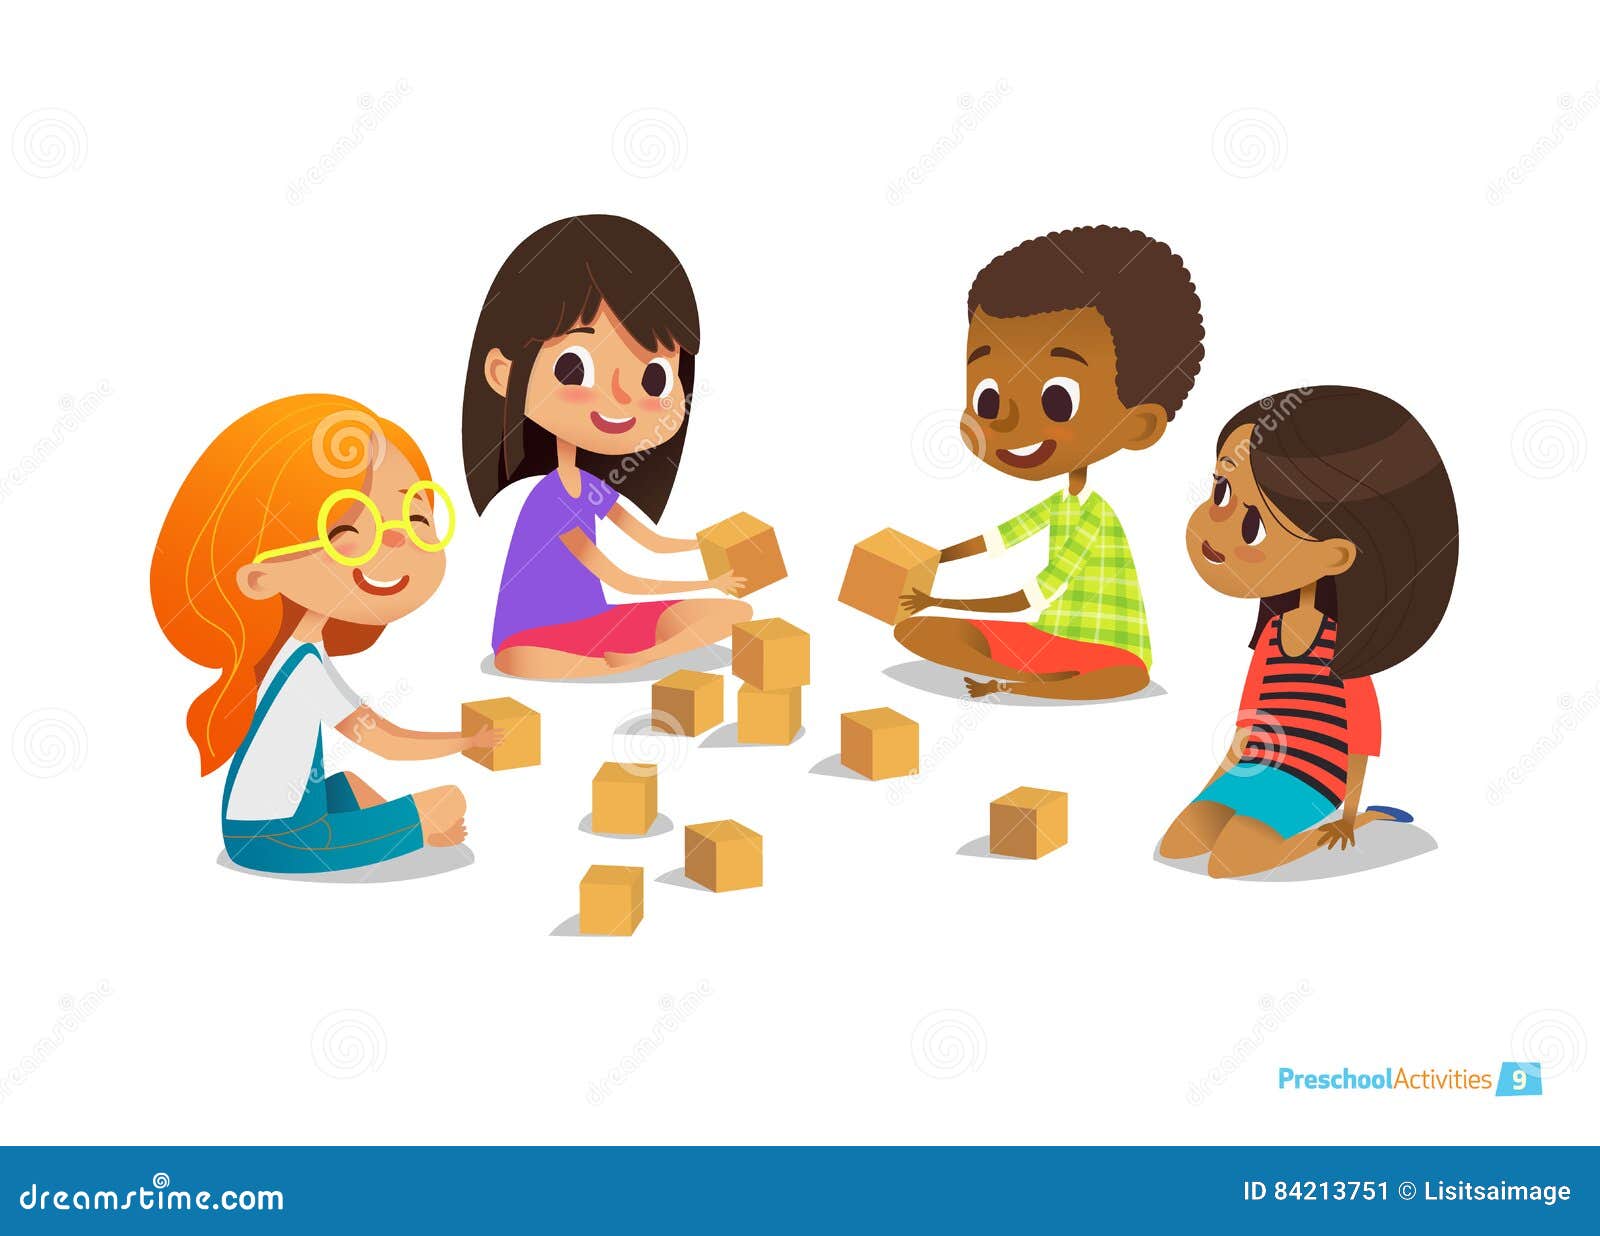 laughing and smiling kids sit on floor in circle, play with toy cubes talk.